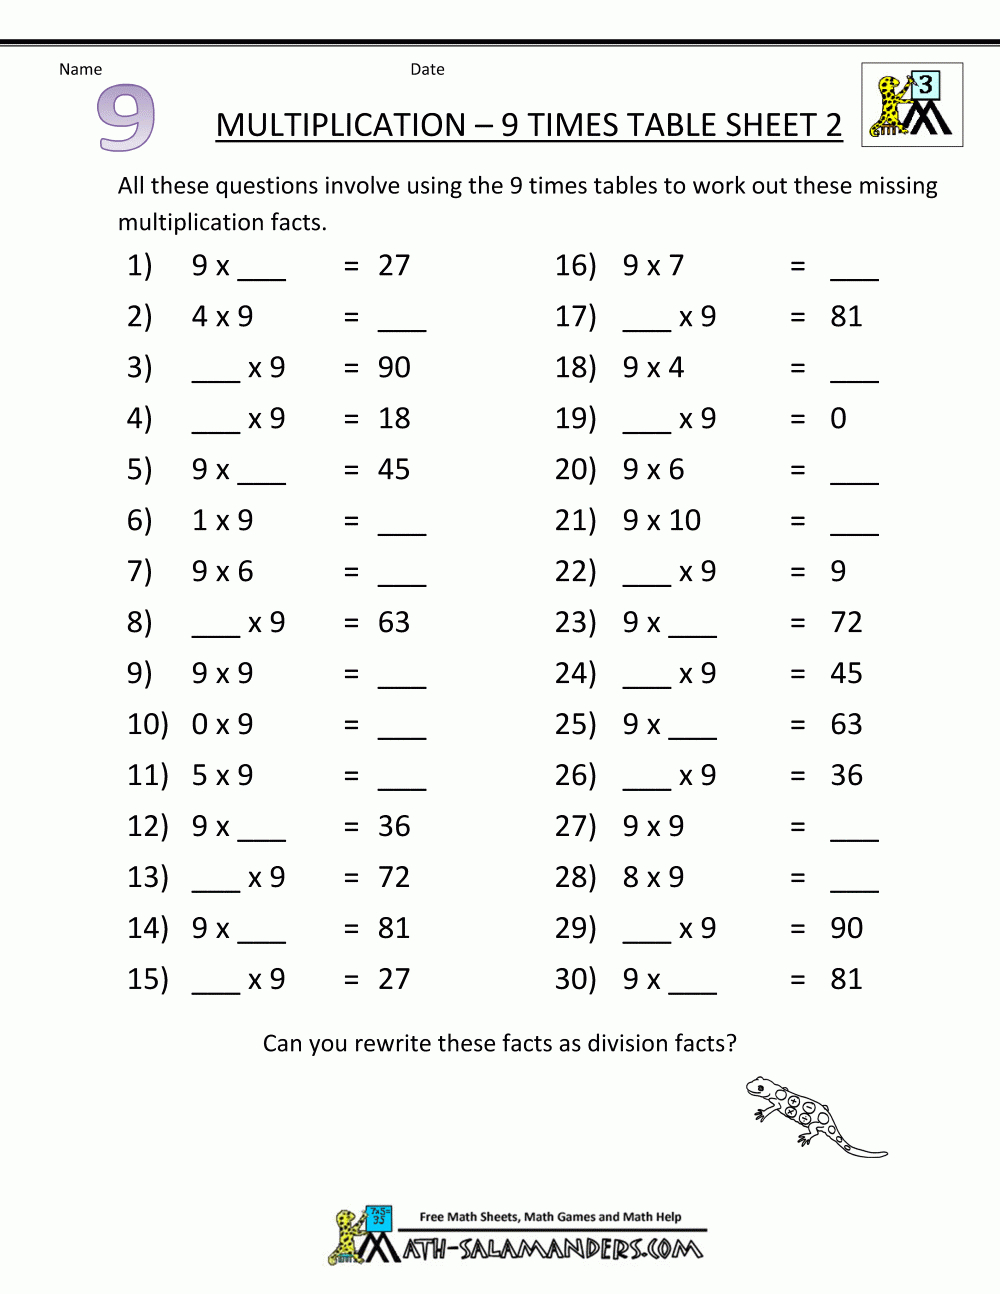 Printable Math Worksheets Multiplication 9 Times Table 2 | Education - Free Printable Math Worksheets Multiplication Facts